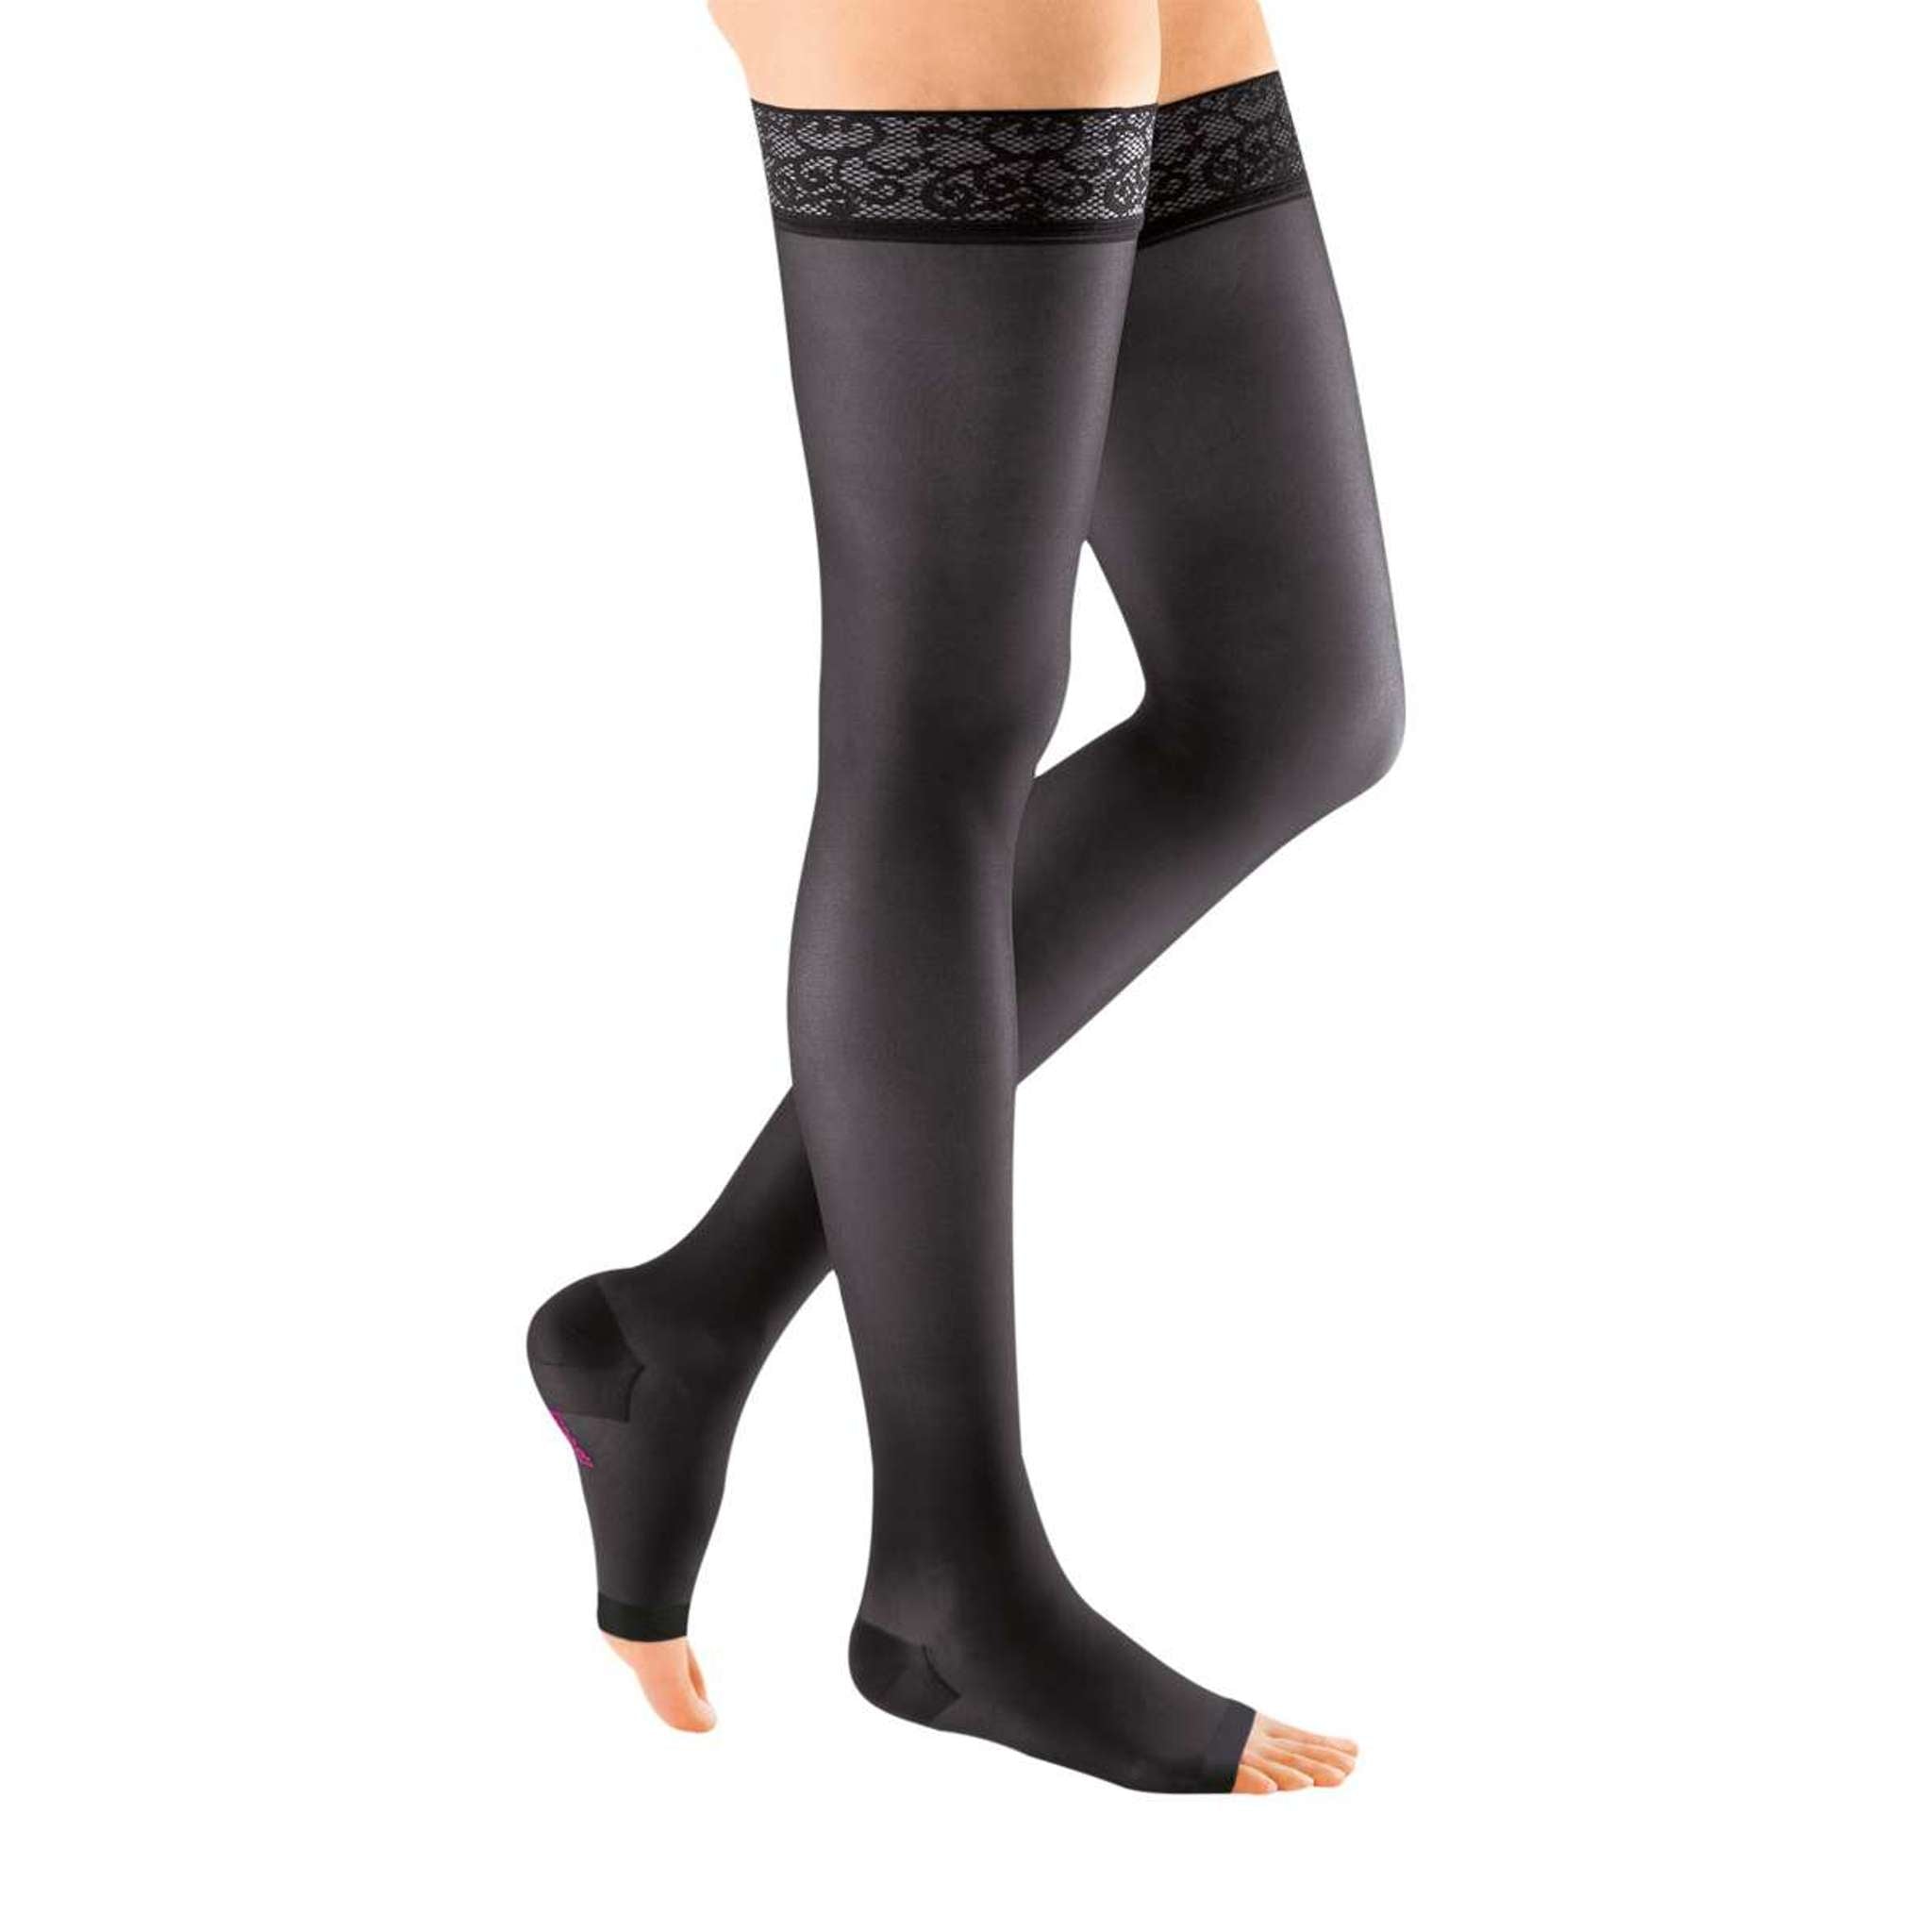 mediven sheer & soft 30-40 mmHg Thigh High w/Lace Top Band Open